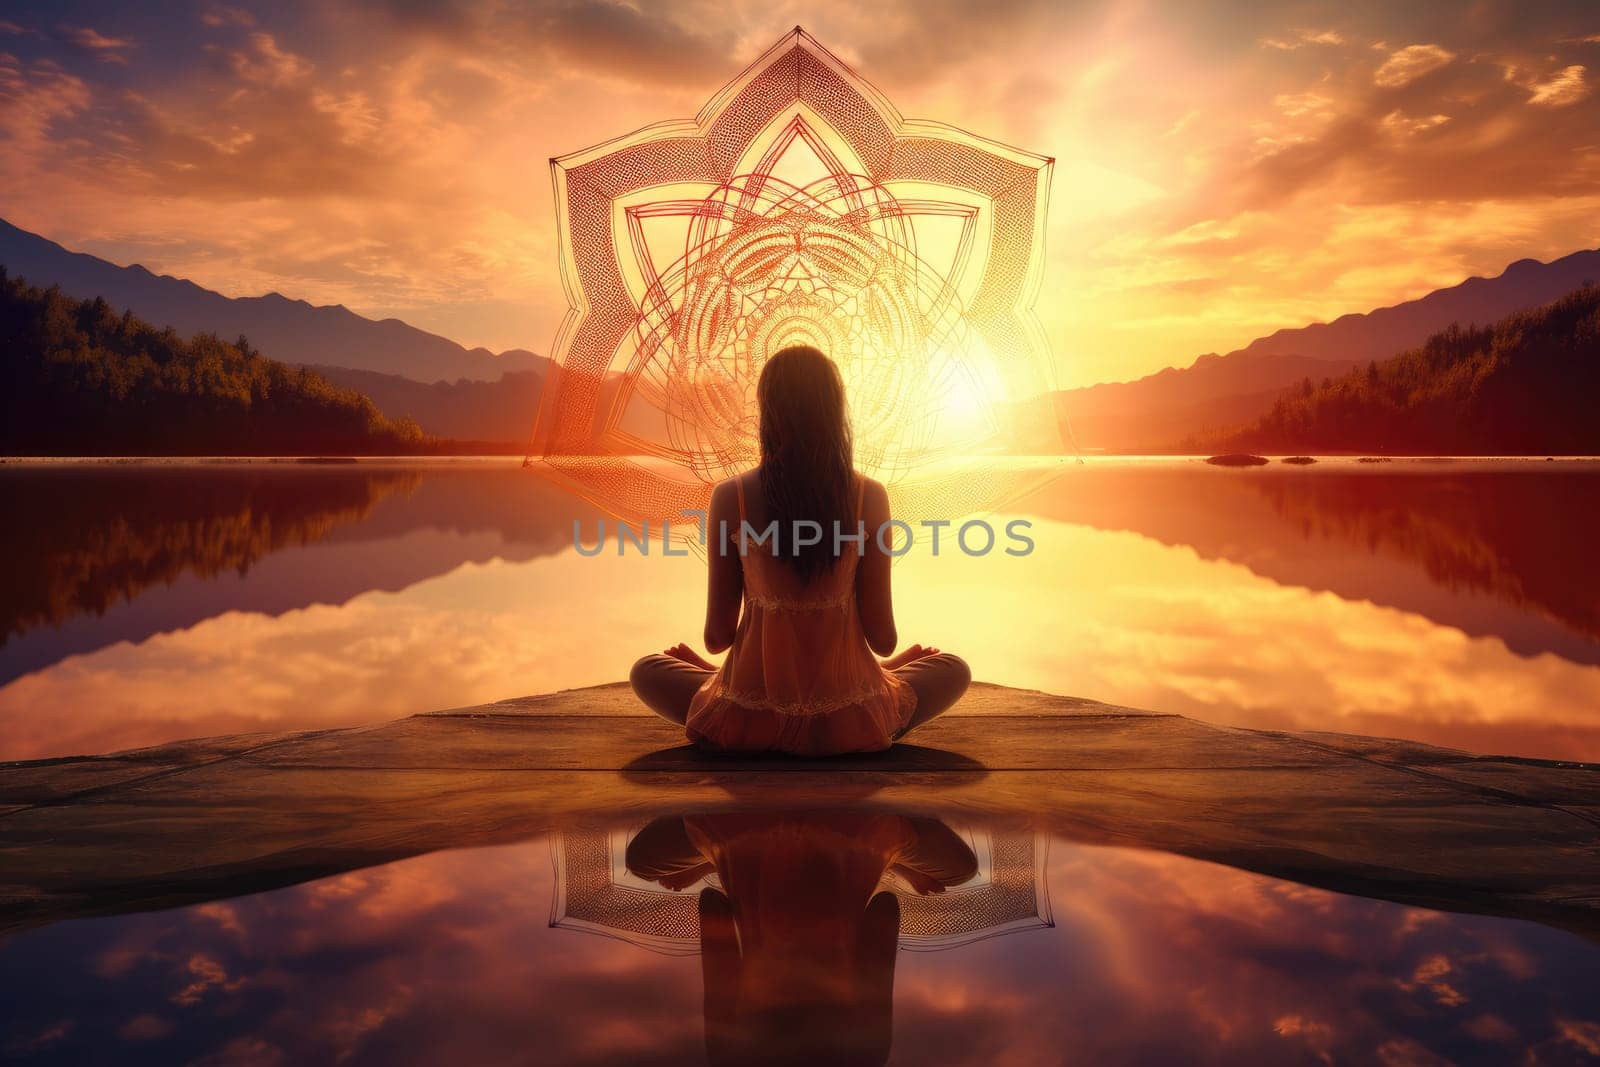 A woman sits in a peaceful meditation pose, surrounded by the serene beauty of nature as the sun sets in the background. This tranquil scene evokes a sense of mindfulness and inner peace.